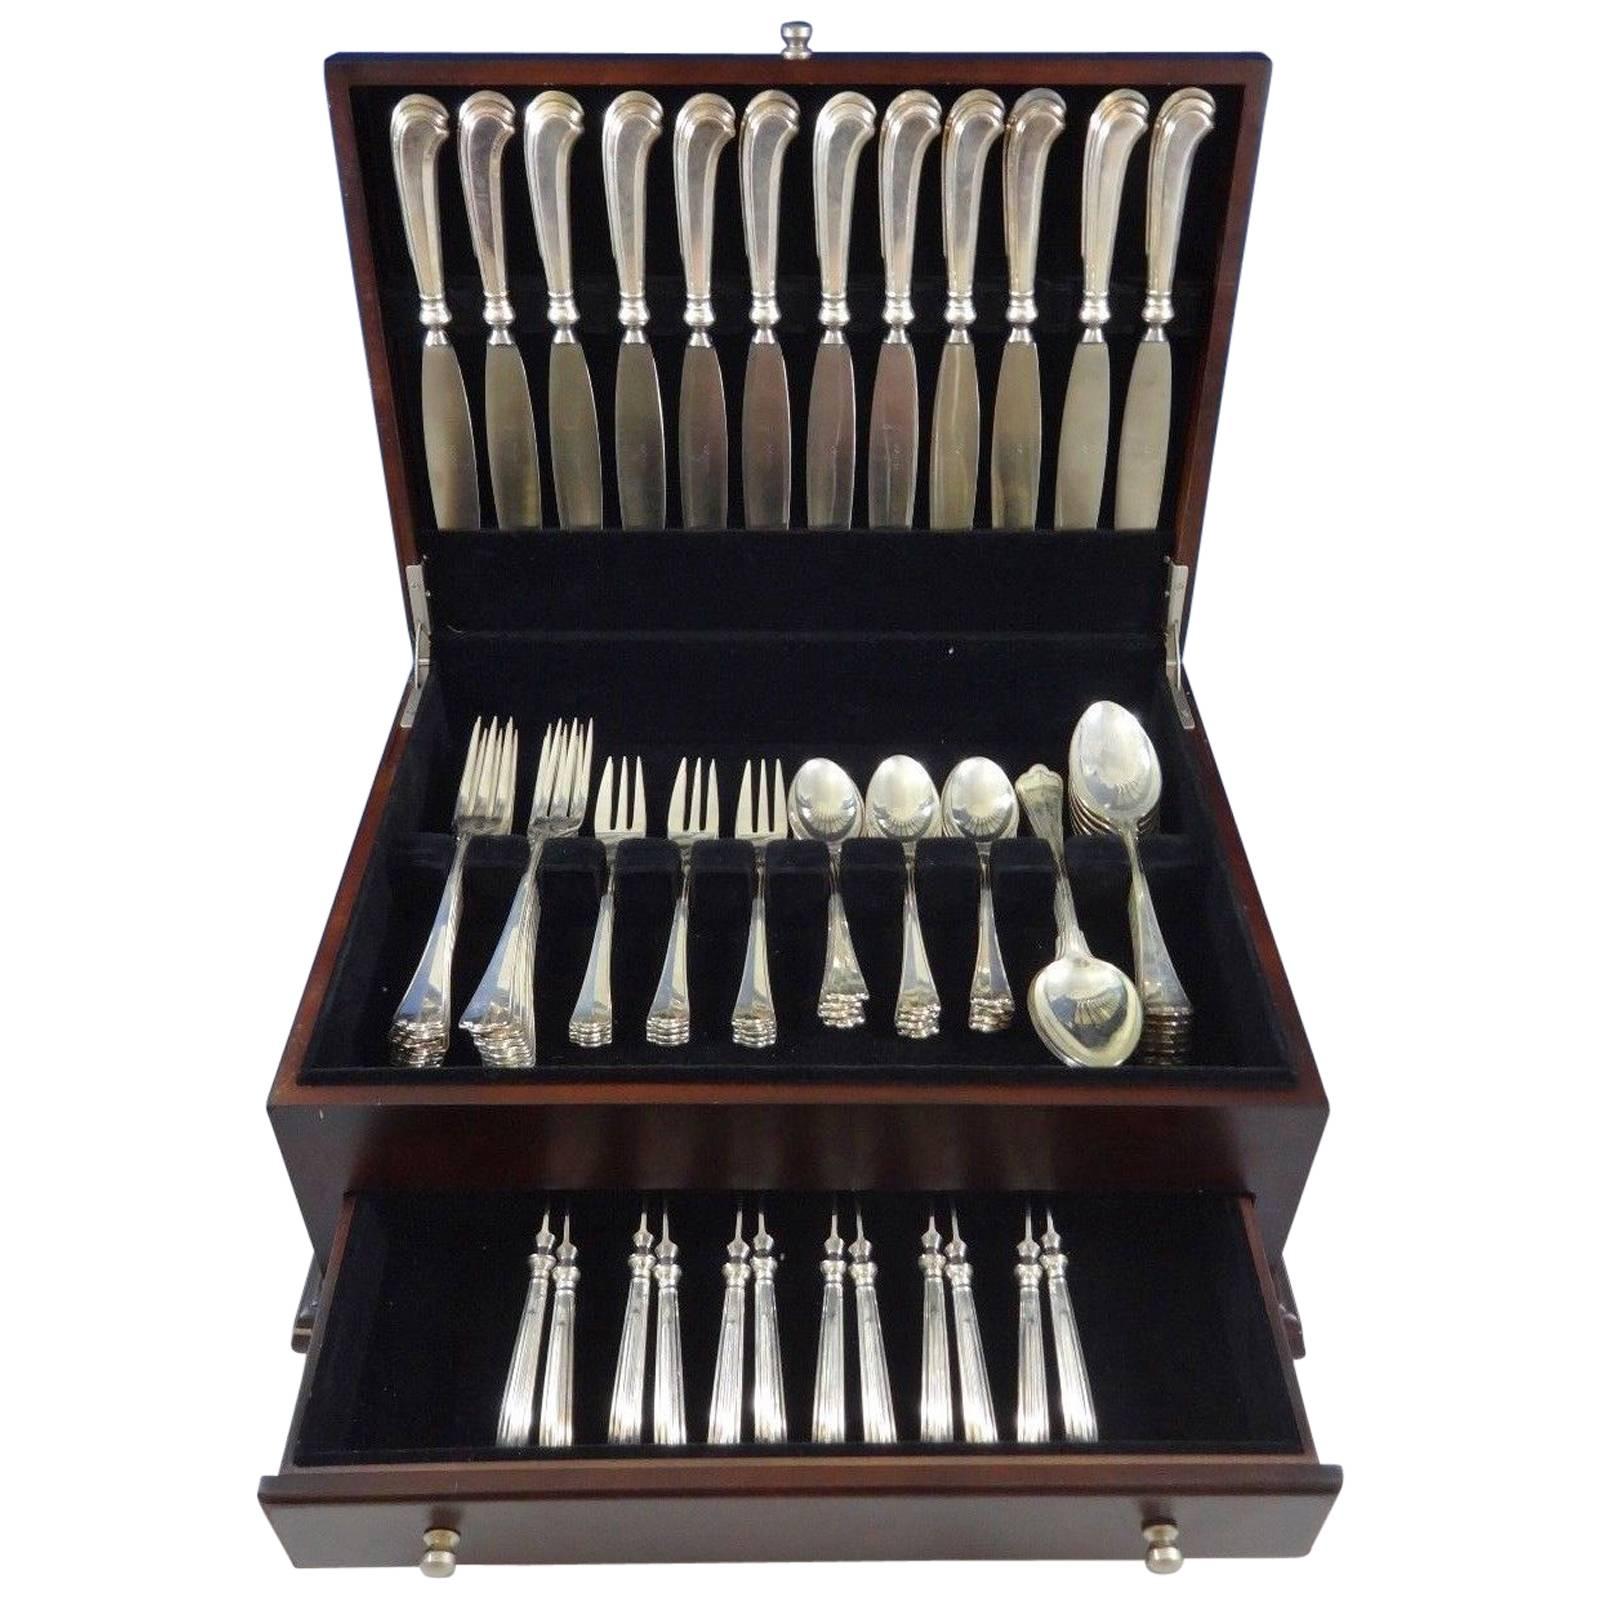 St. Mark 800 silver flatware set of 72 pieces. The knives have wonderful pistol grip handles. This set includes:

12 dinner knives, 10